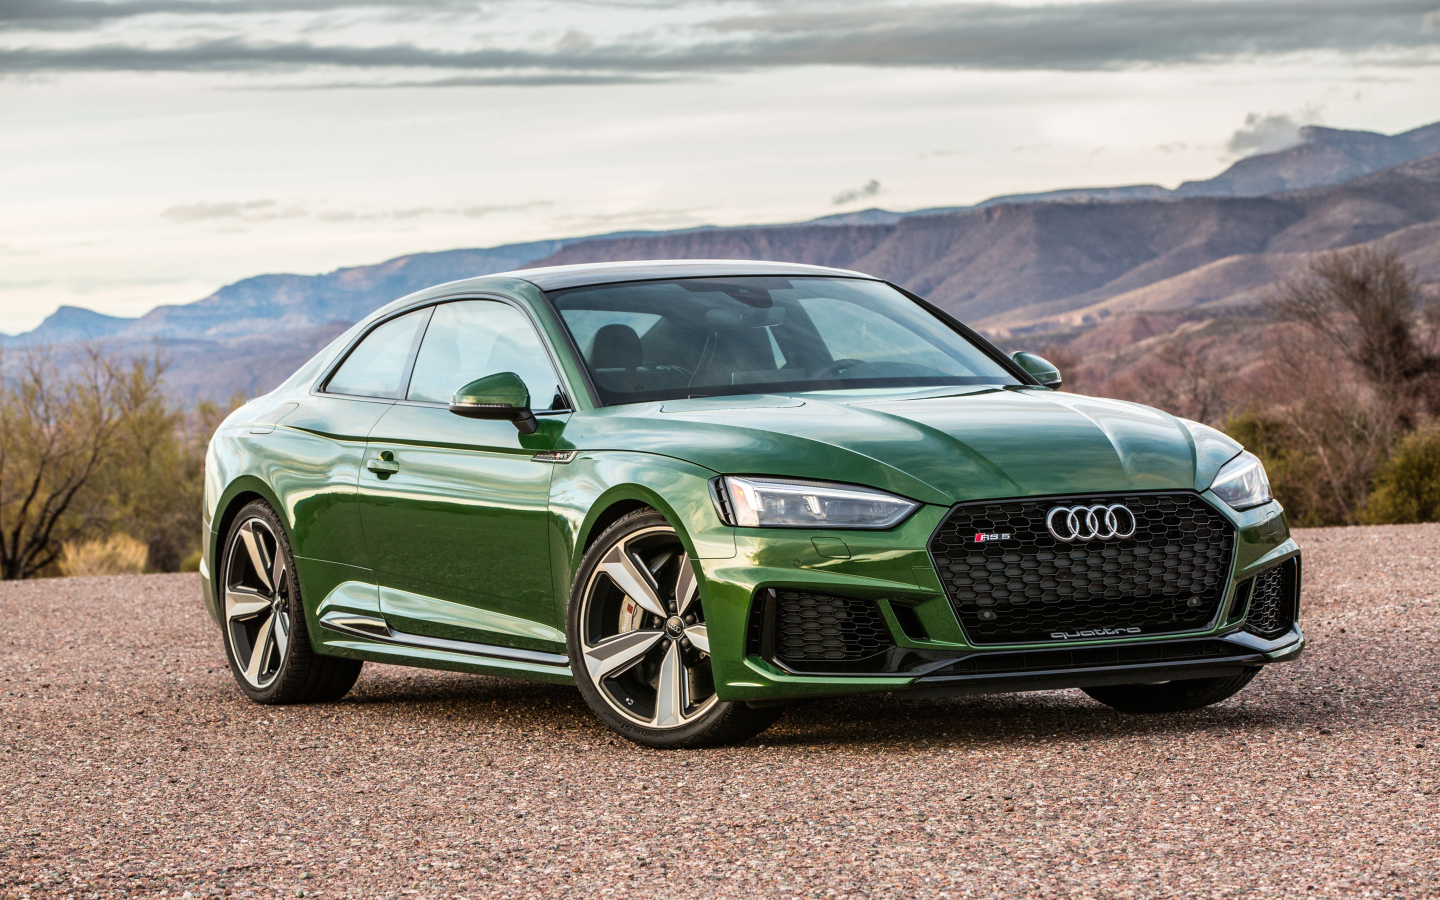 Green car Audi RS 5, 2018 on the background of the horizon